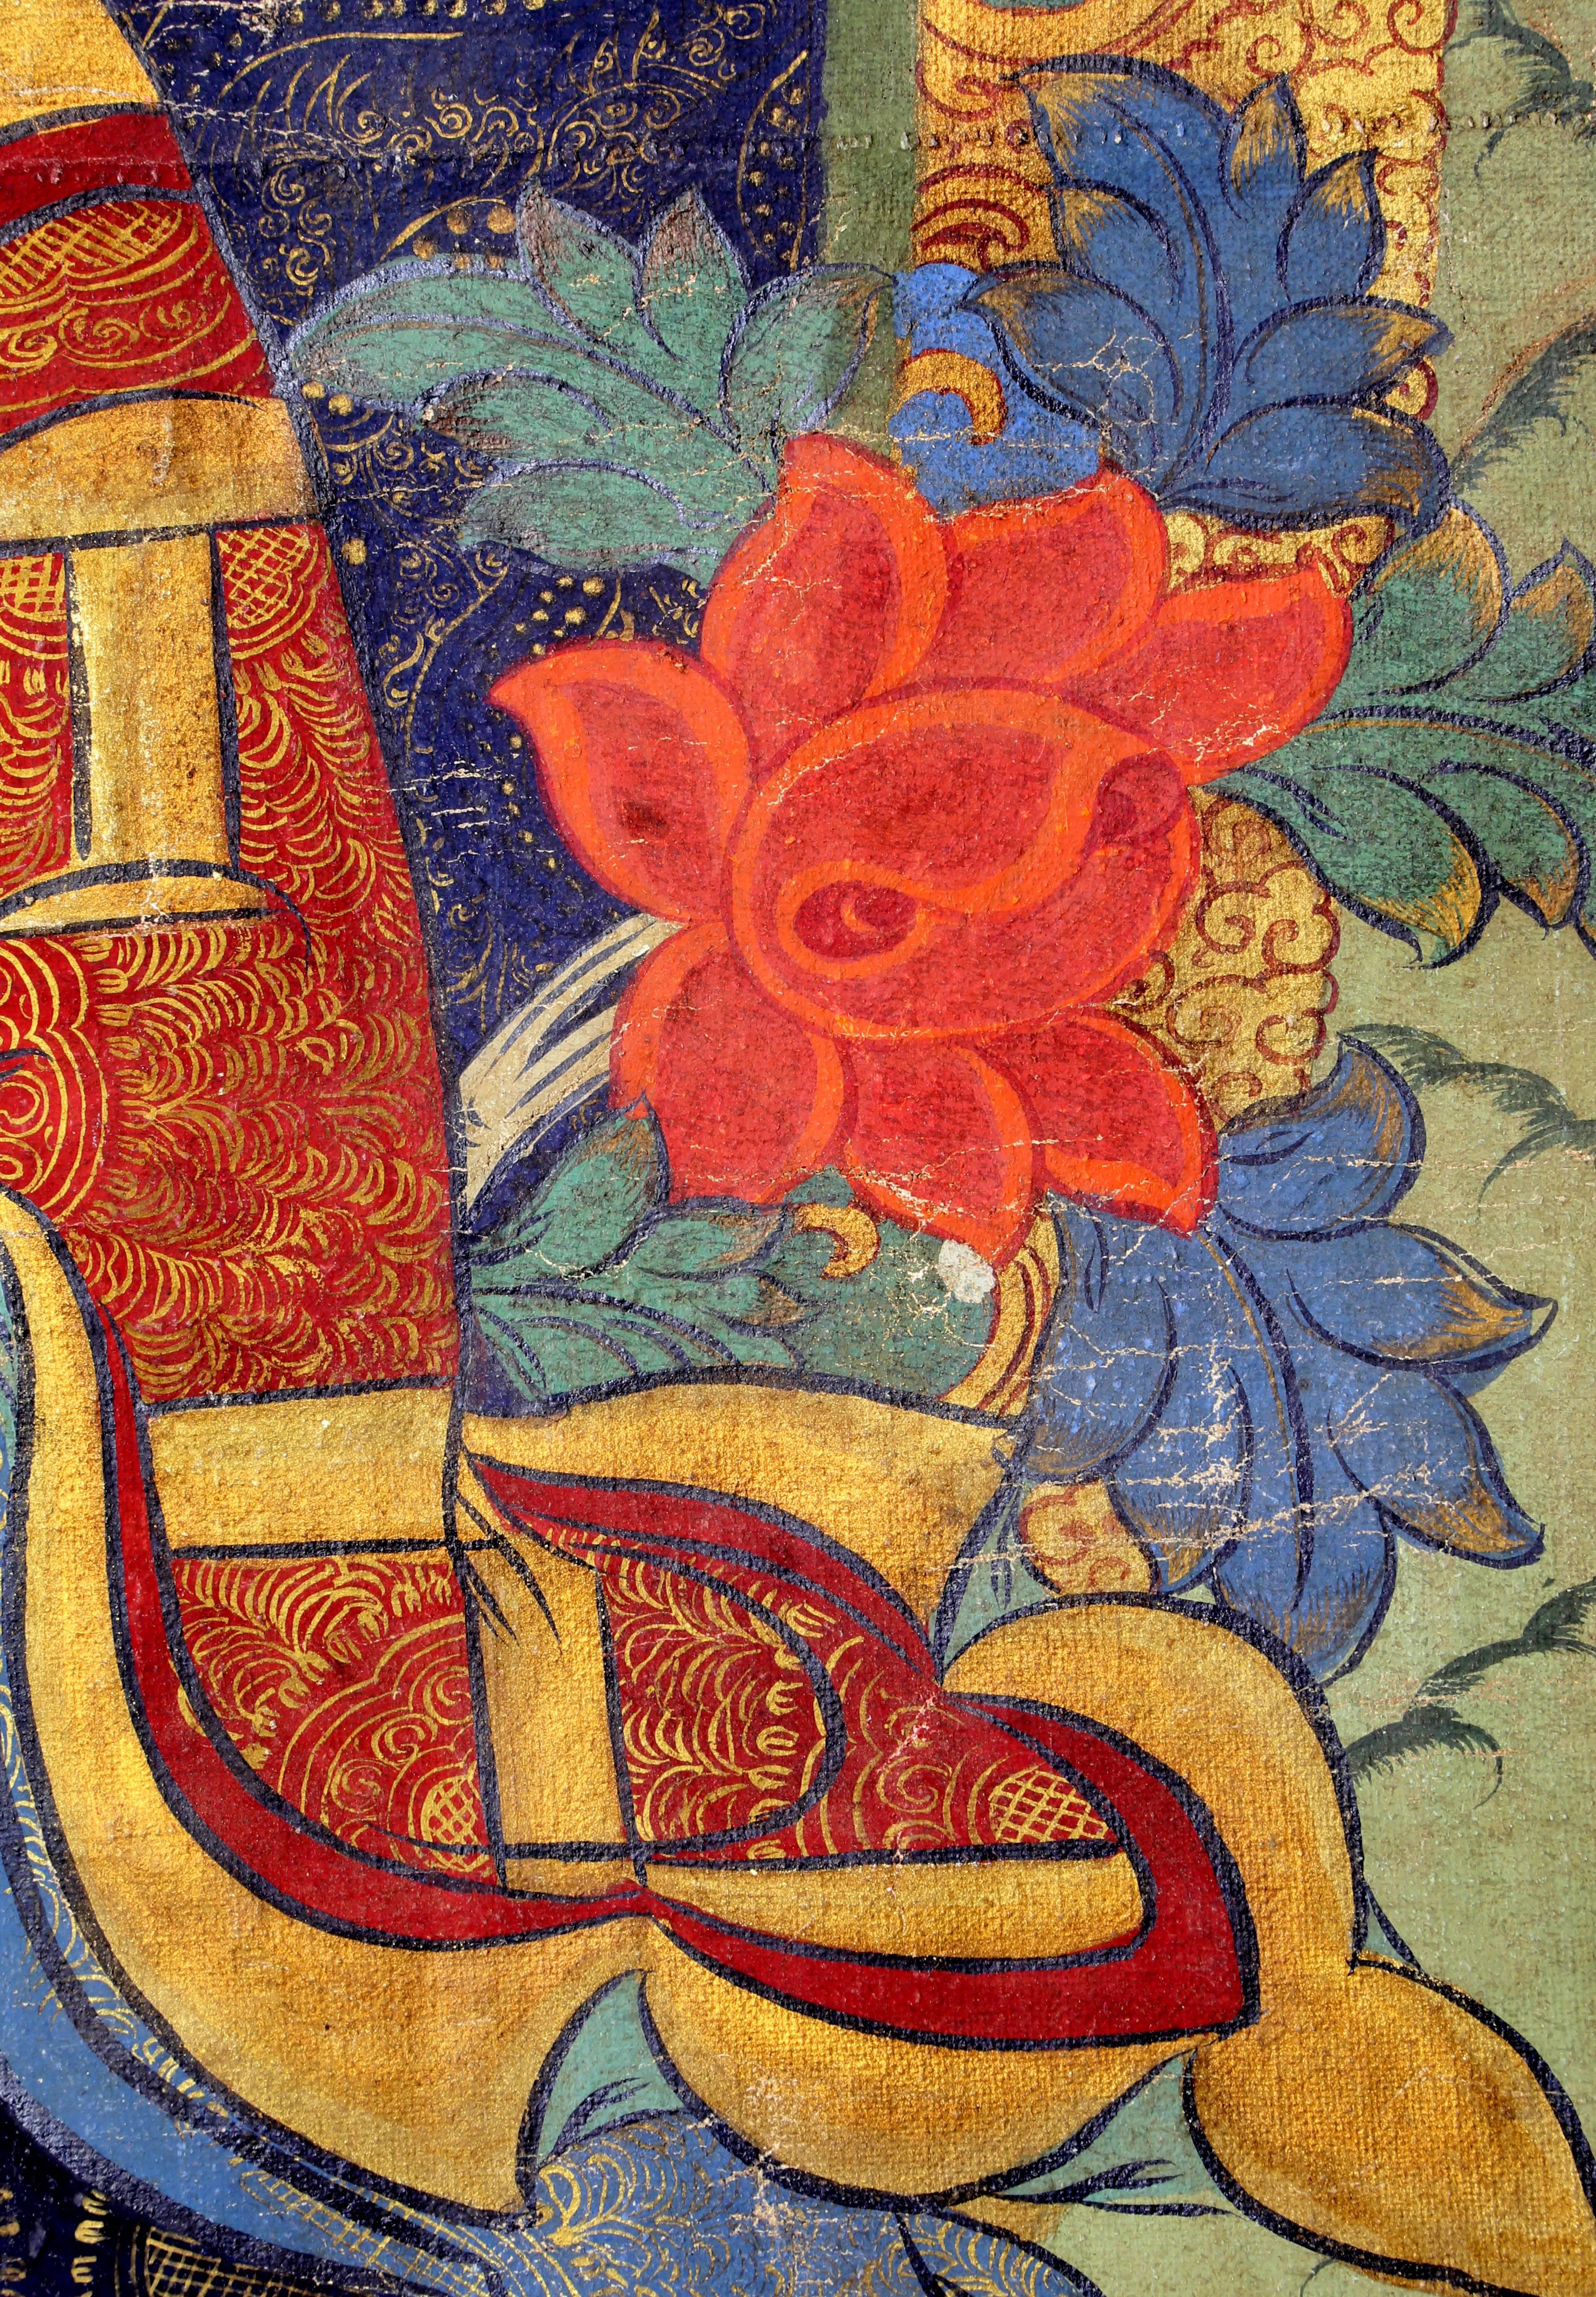 Wrapped stretcher with mounted Thangka, polychrome gouache on linen, depicting man with elongated earlobes, holding fire, with vignettes of figures at corners. Overall: 41 W x 60 H.